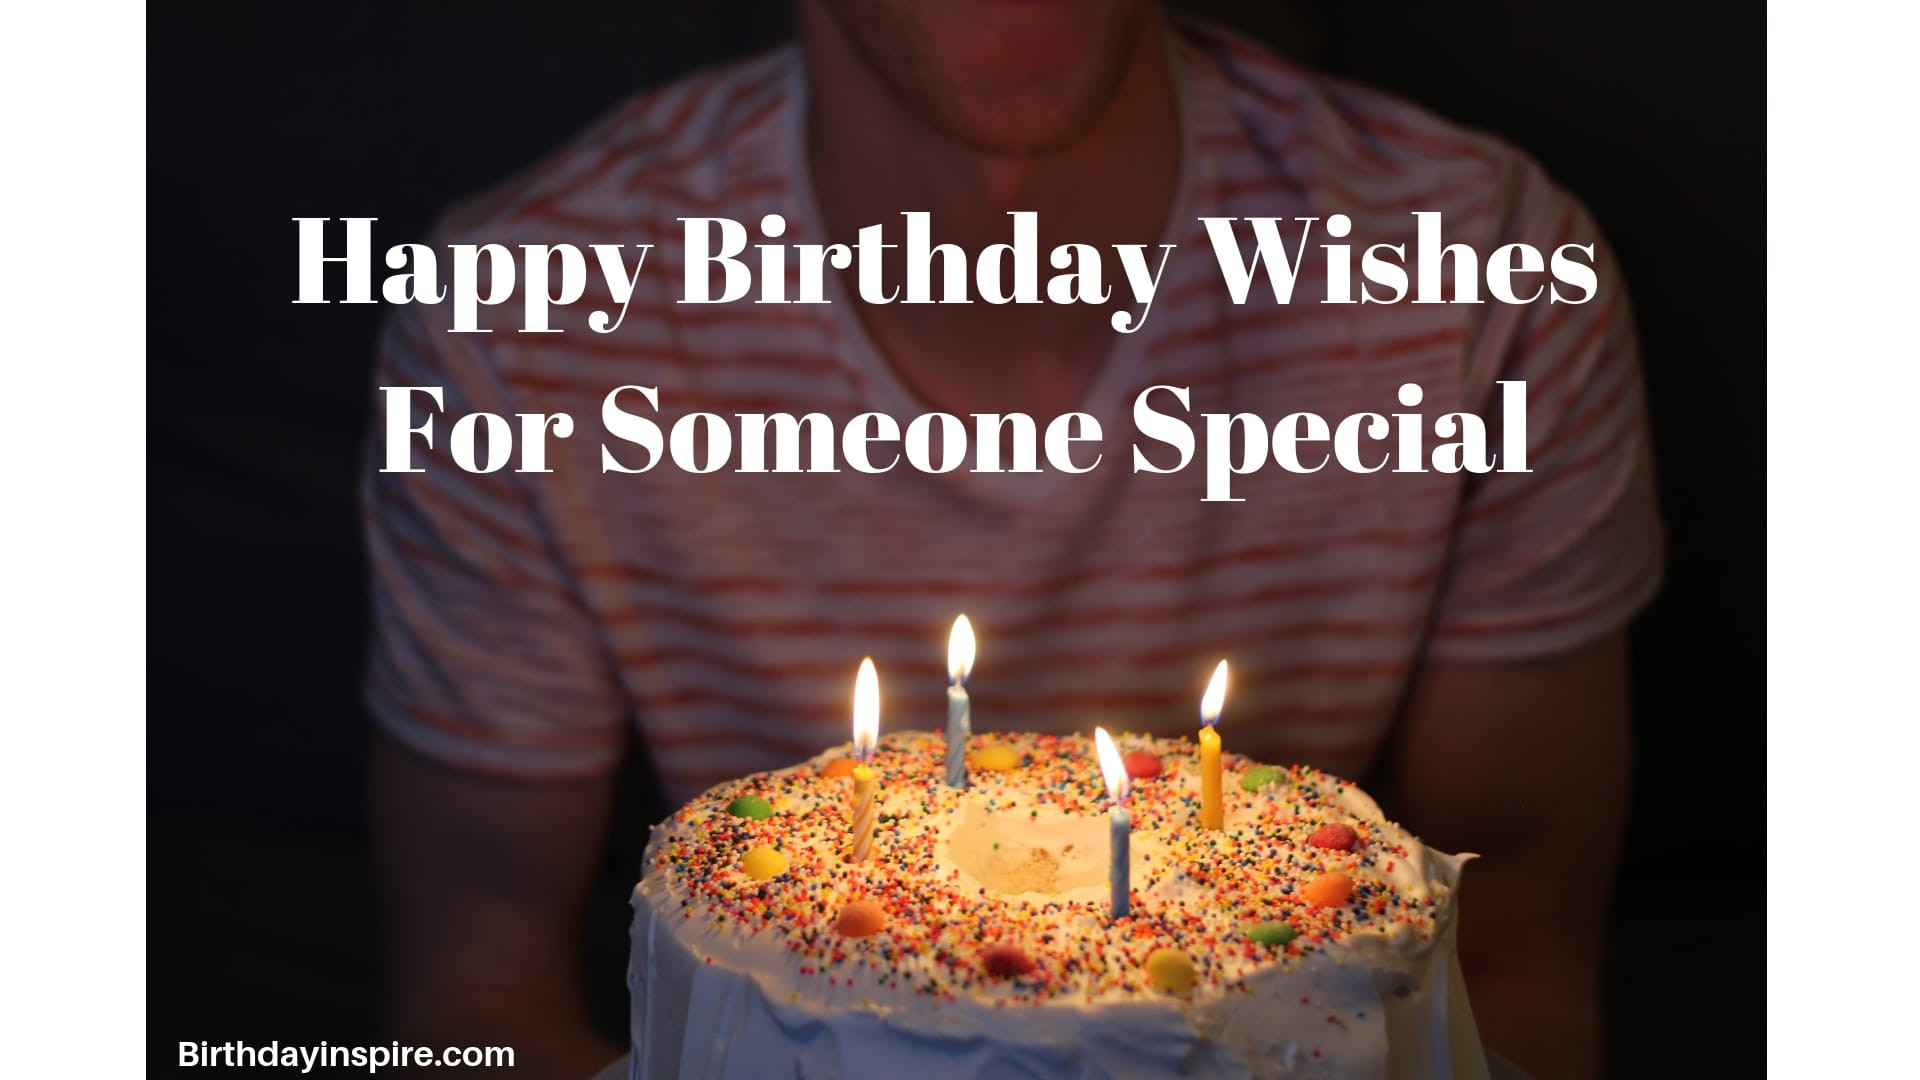 Happy Birthday Wishes To Someone Special
 45 Heartening Happy Birthday Wishes For Someone Special